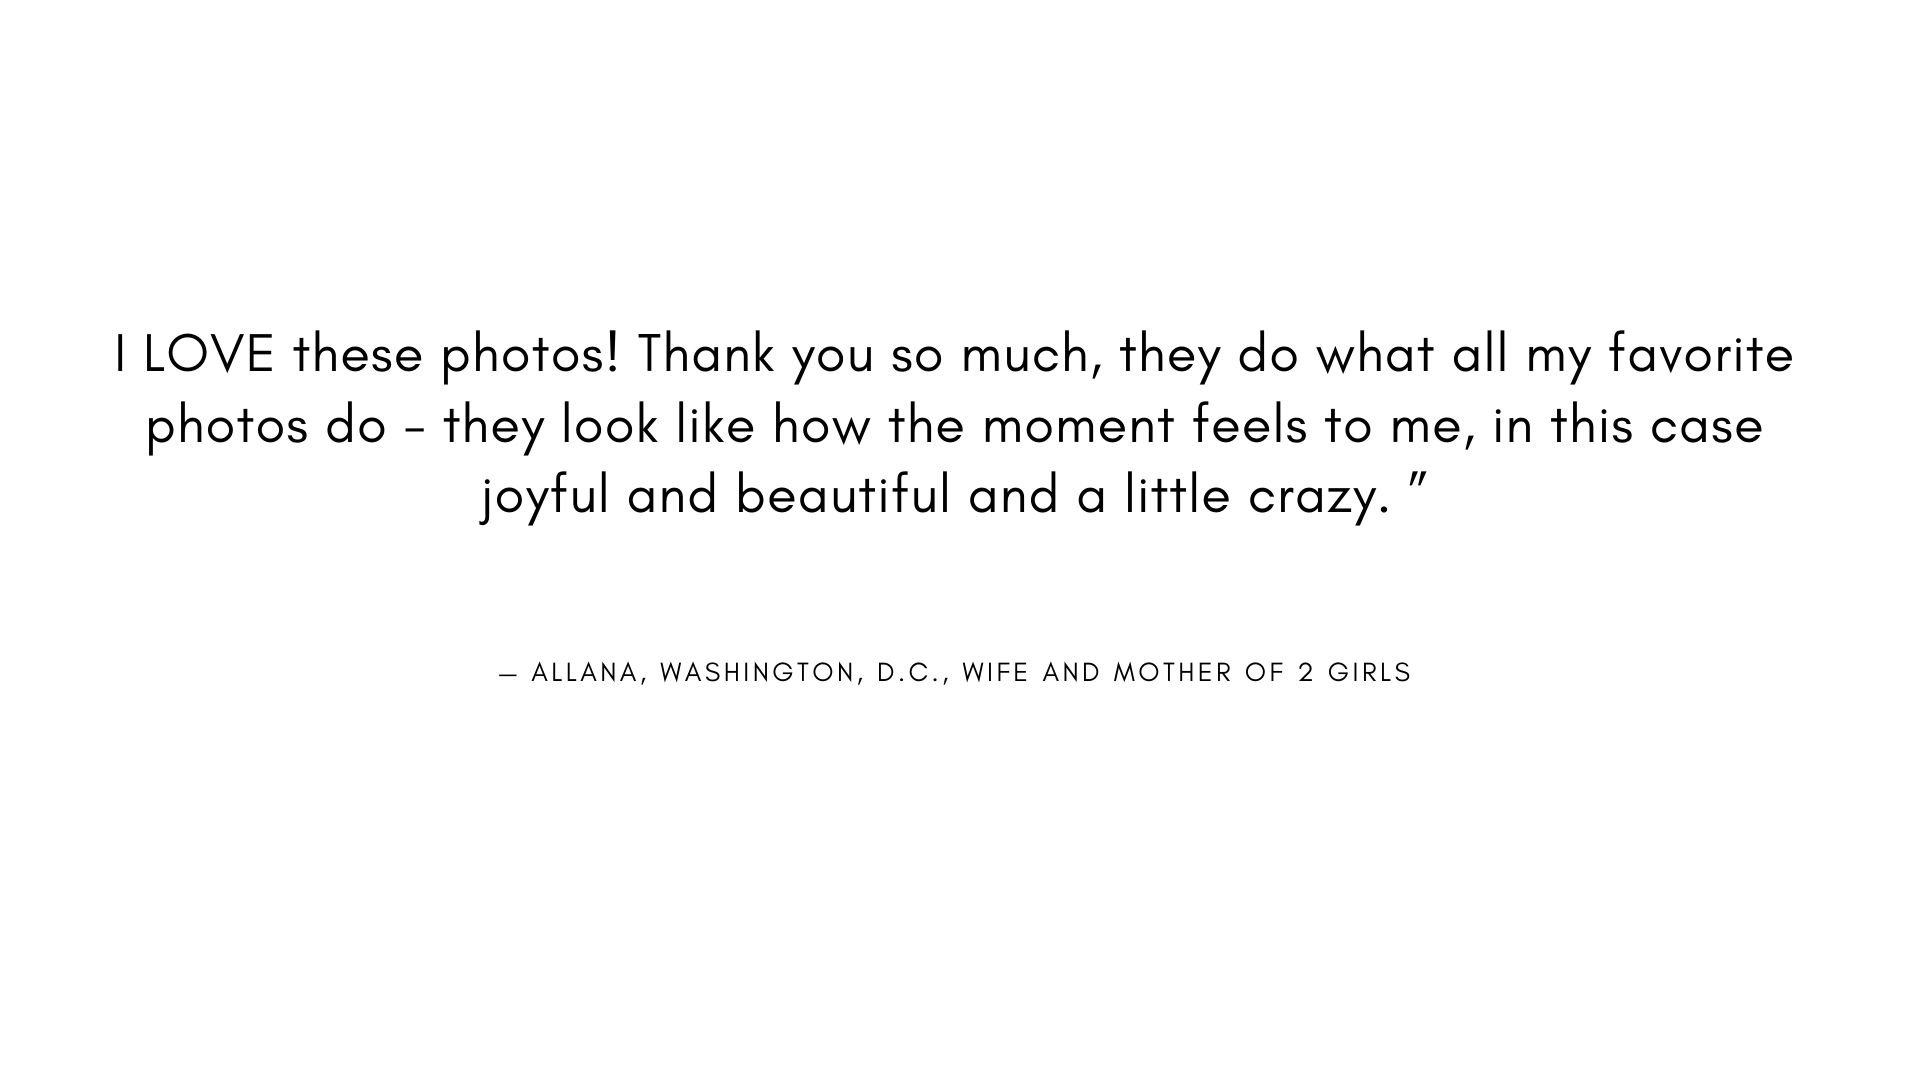  I LOVE these photos! Thank you so much, they do what all my favorite photos do - they look like how the moment feels to me, in this case joyful and beautiful and a little crazy. "  - ALLANA, WASHINGTON, D.C., WIFE AND MOTHER OF 2 GIRLS 